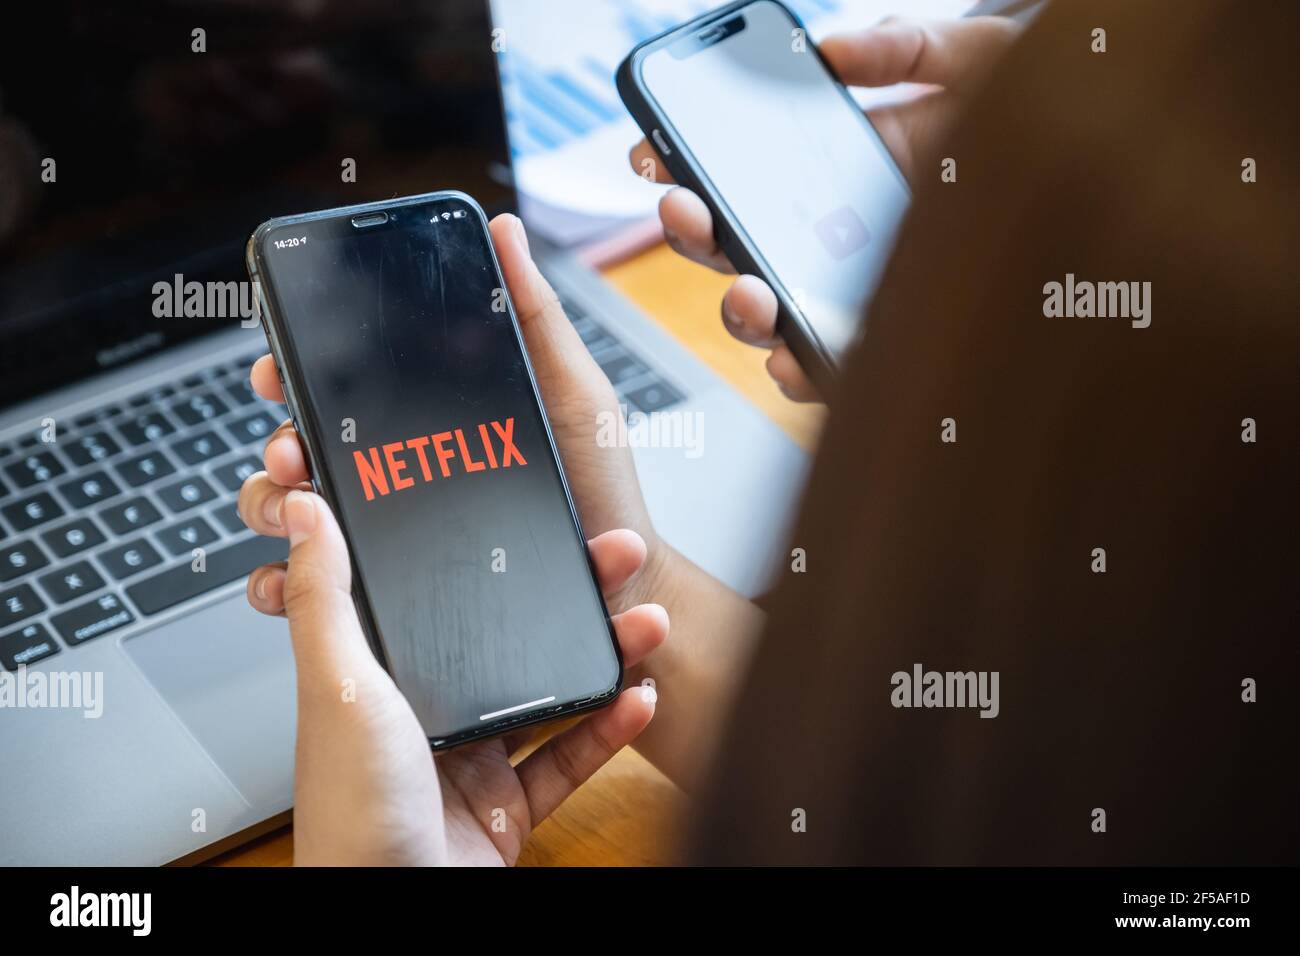 CHIANG MAI, THAILAND - FEB 11, 2021 : Woman and friend holding Phone with Netflix logotype on a screen and sharing her movie list. Stock Photo